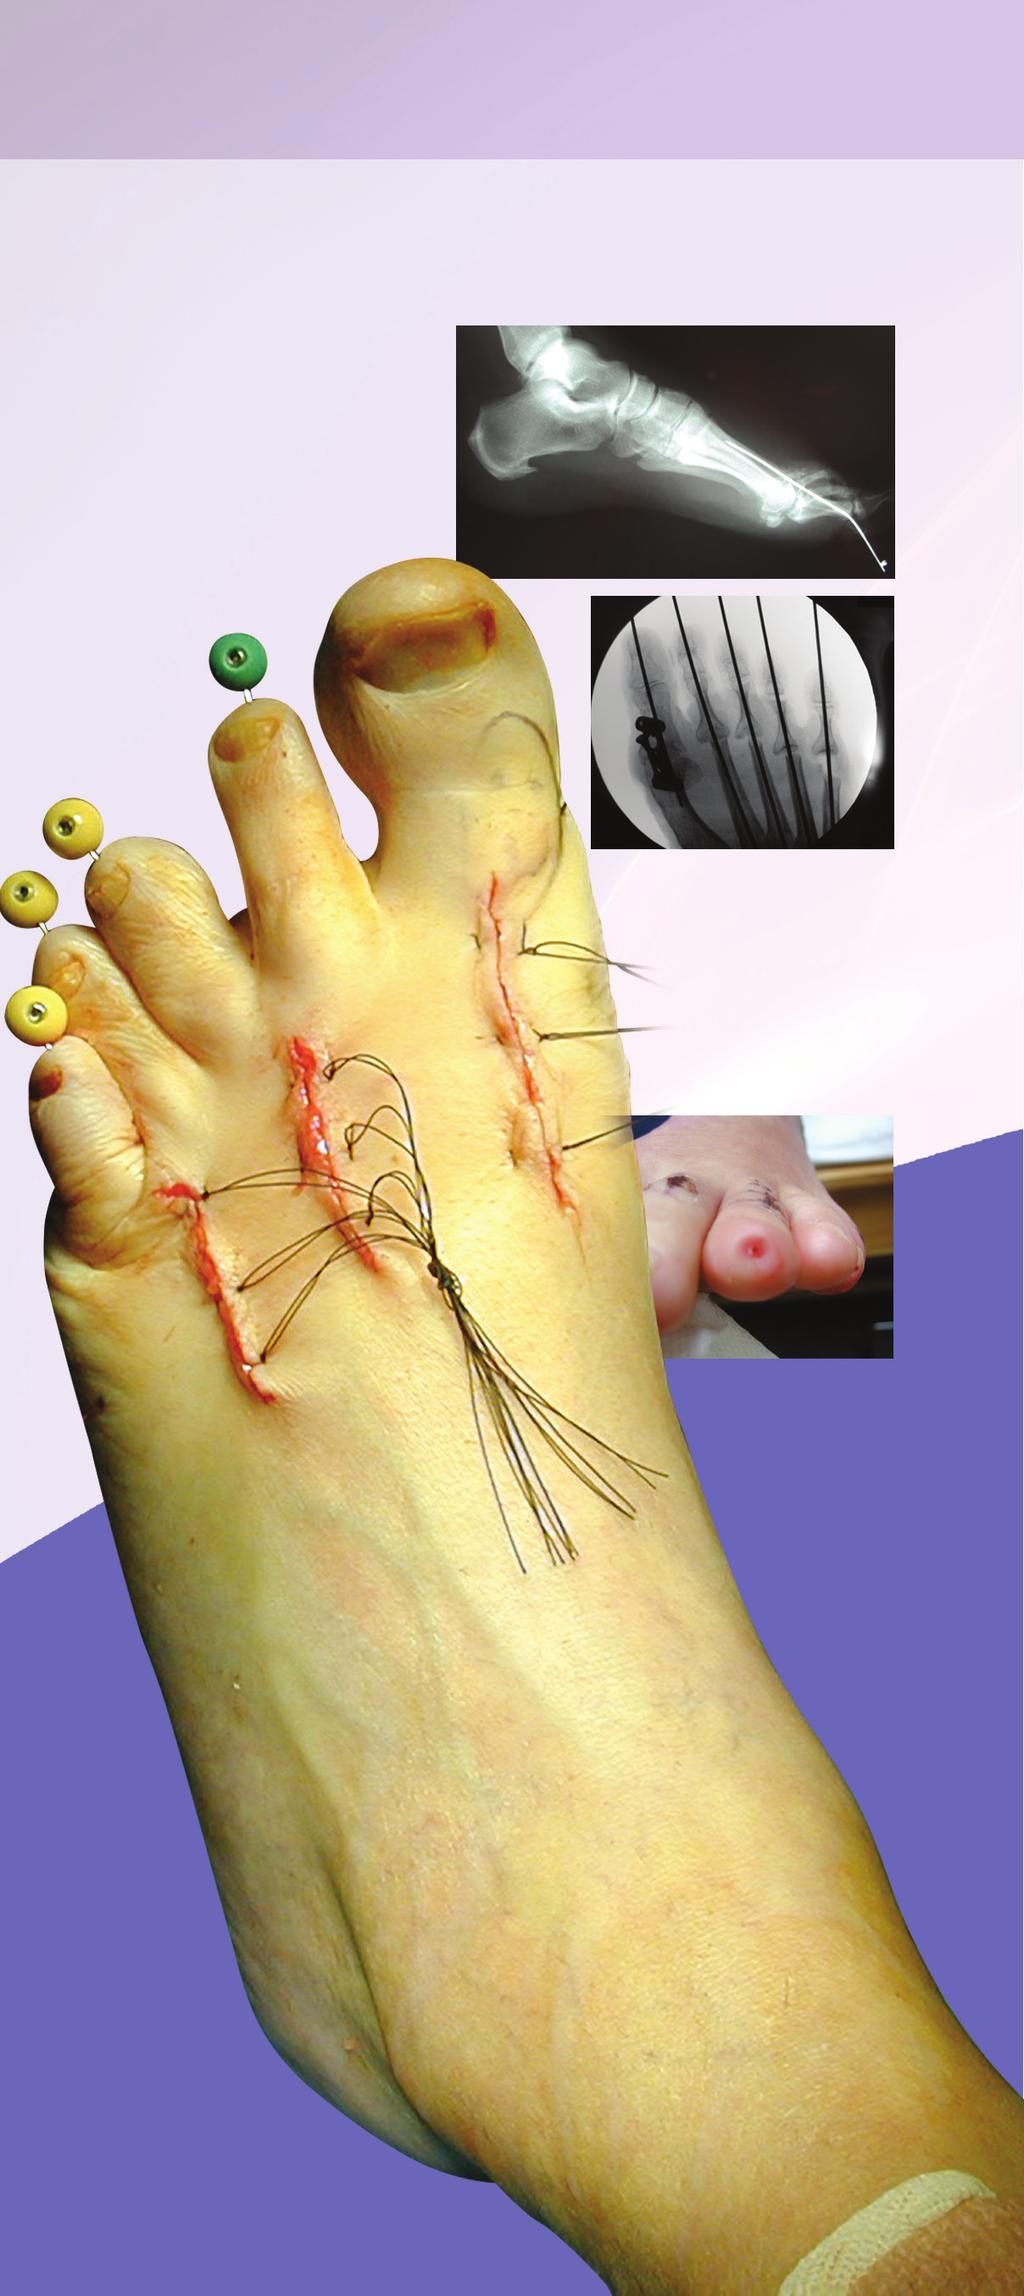 Traditional K-wire treatment involves wires that are exposed at the end of the patient